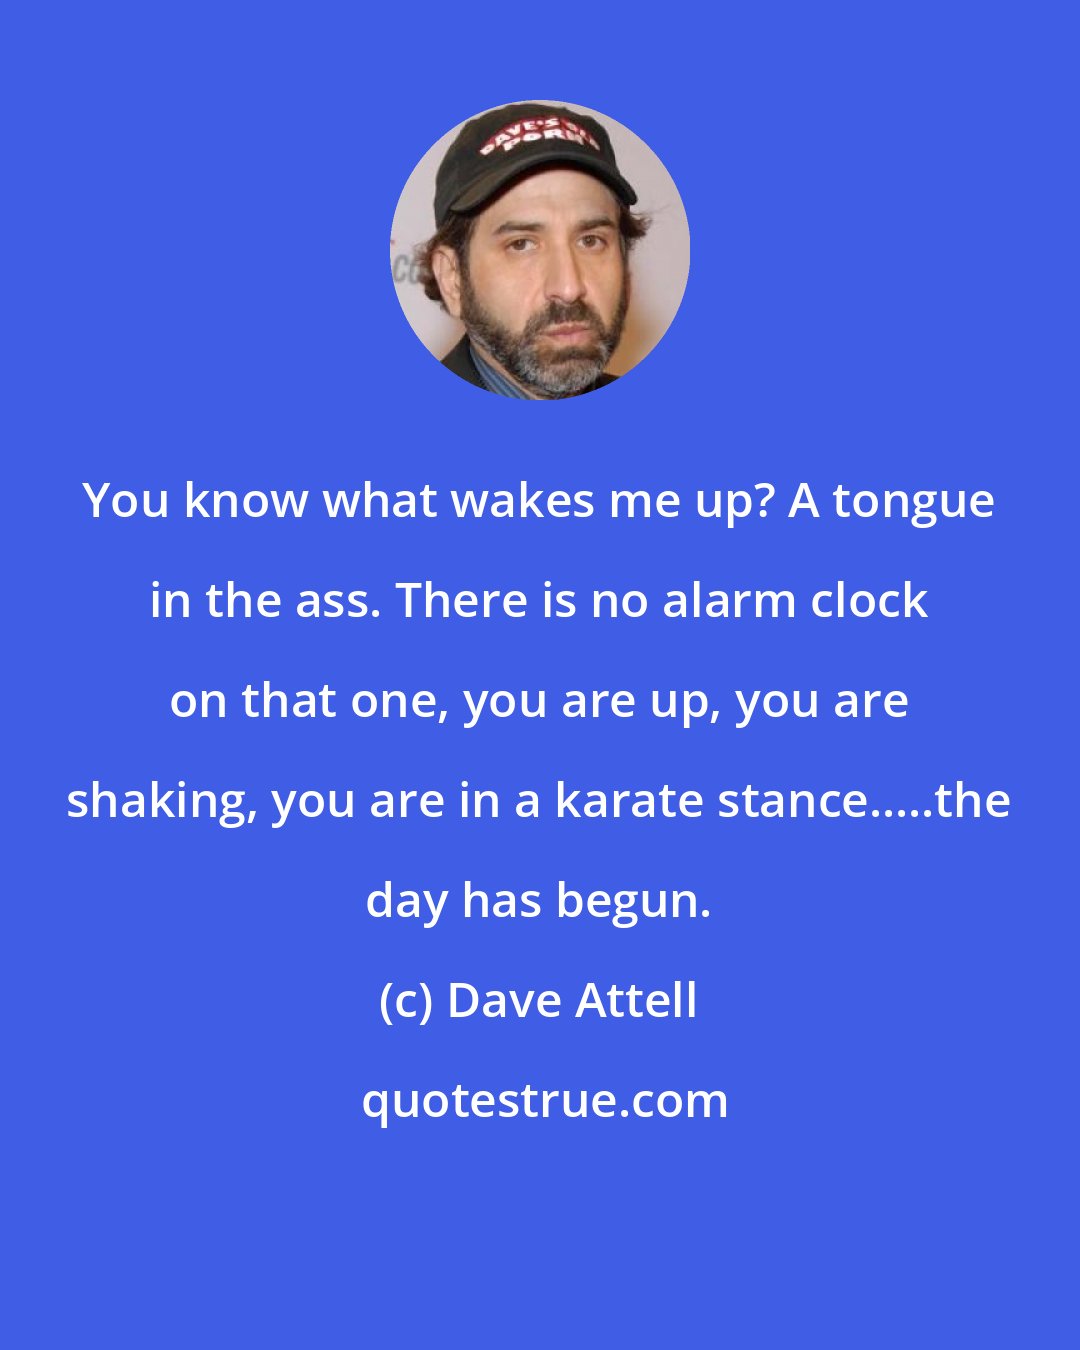 Dave Attell: You know what wakes me up? A tongue in the ass. There is no alarm clock on that one, you are up, you are shaking, you are in a karate stance.....the day has begun.